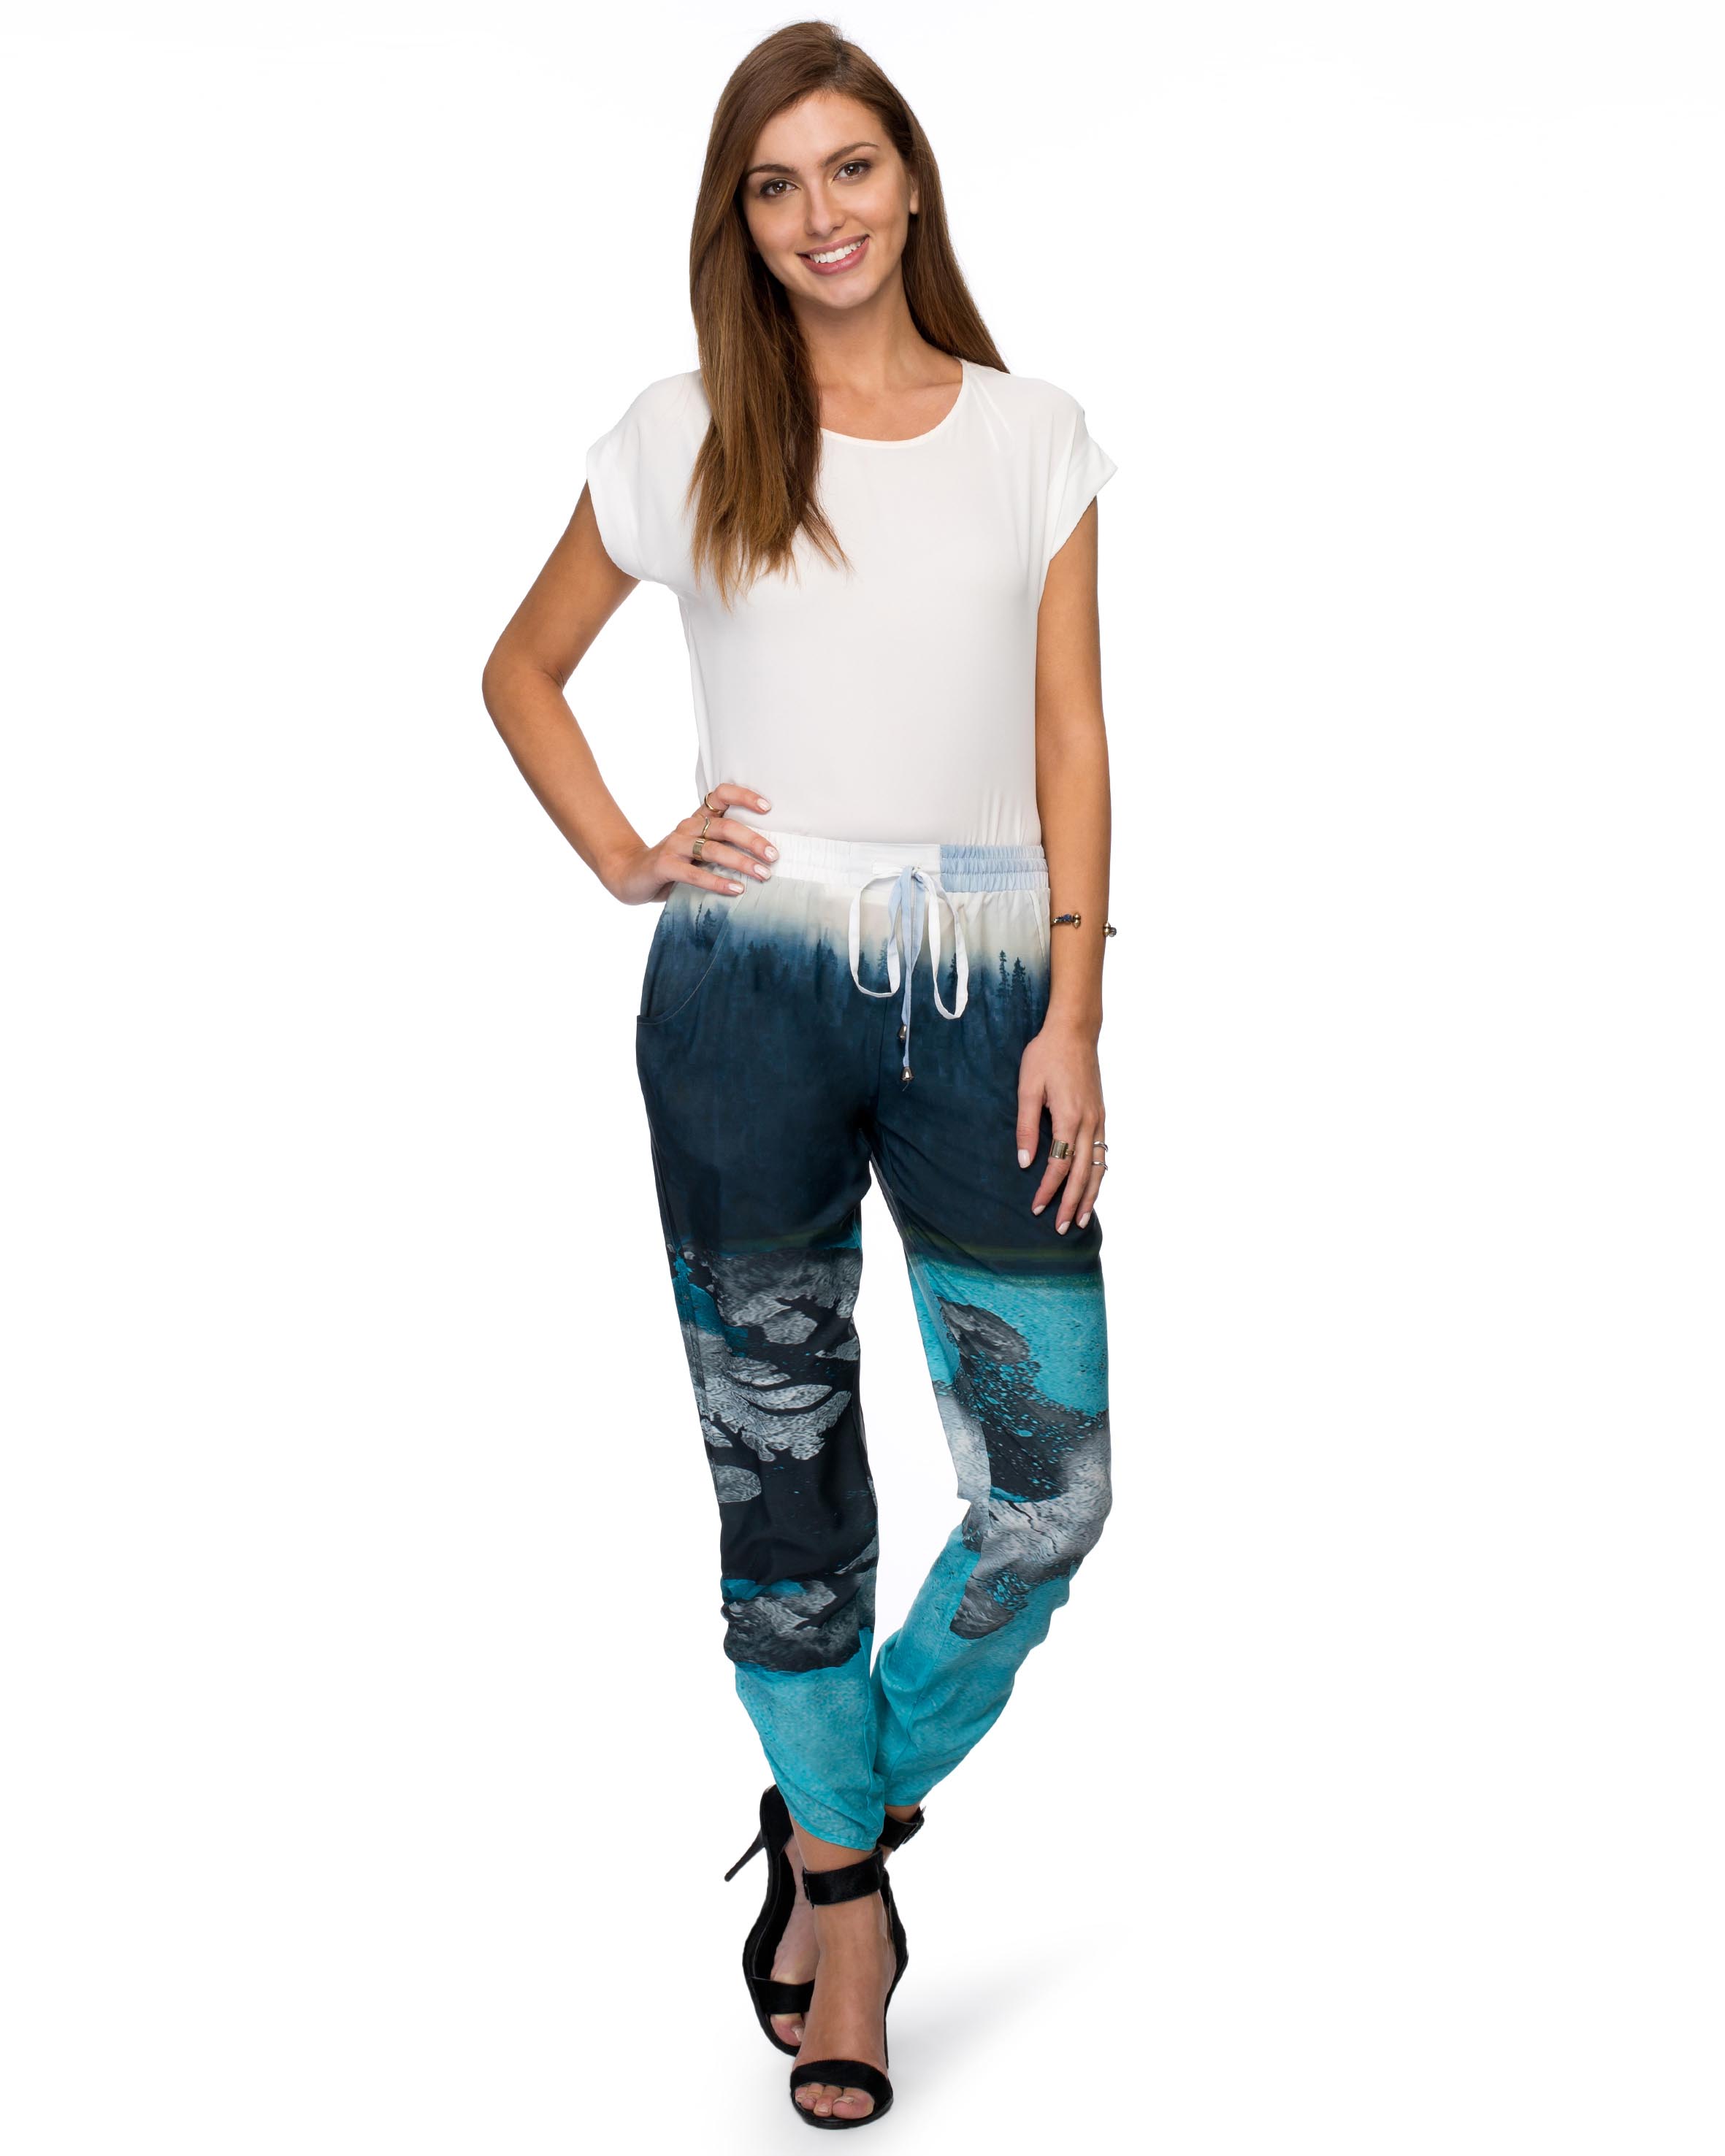 Fate Misty Morning Pant, $129.90